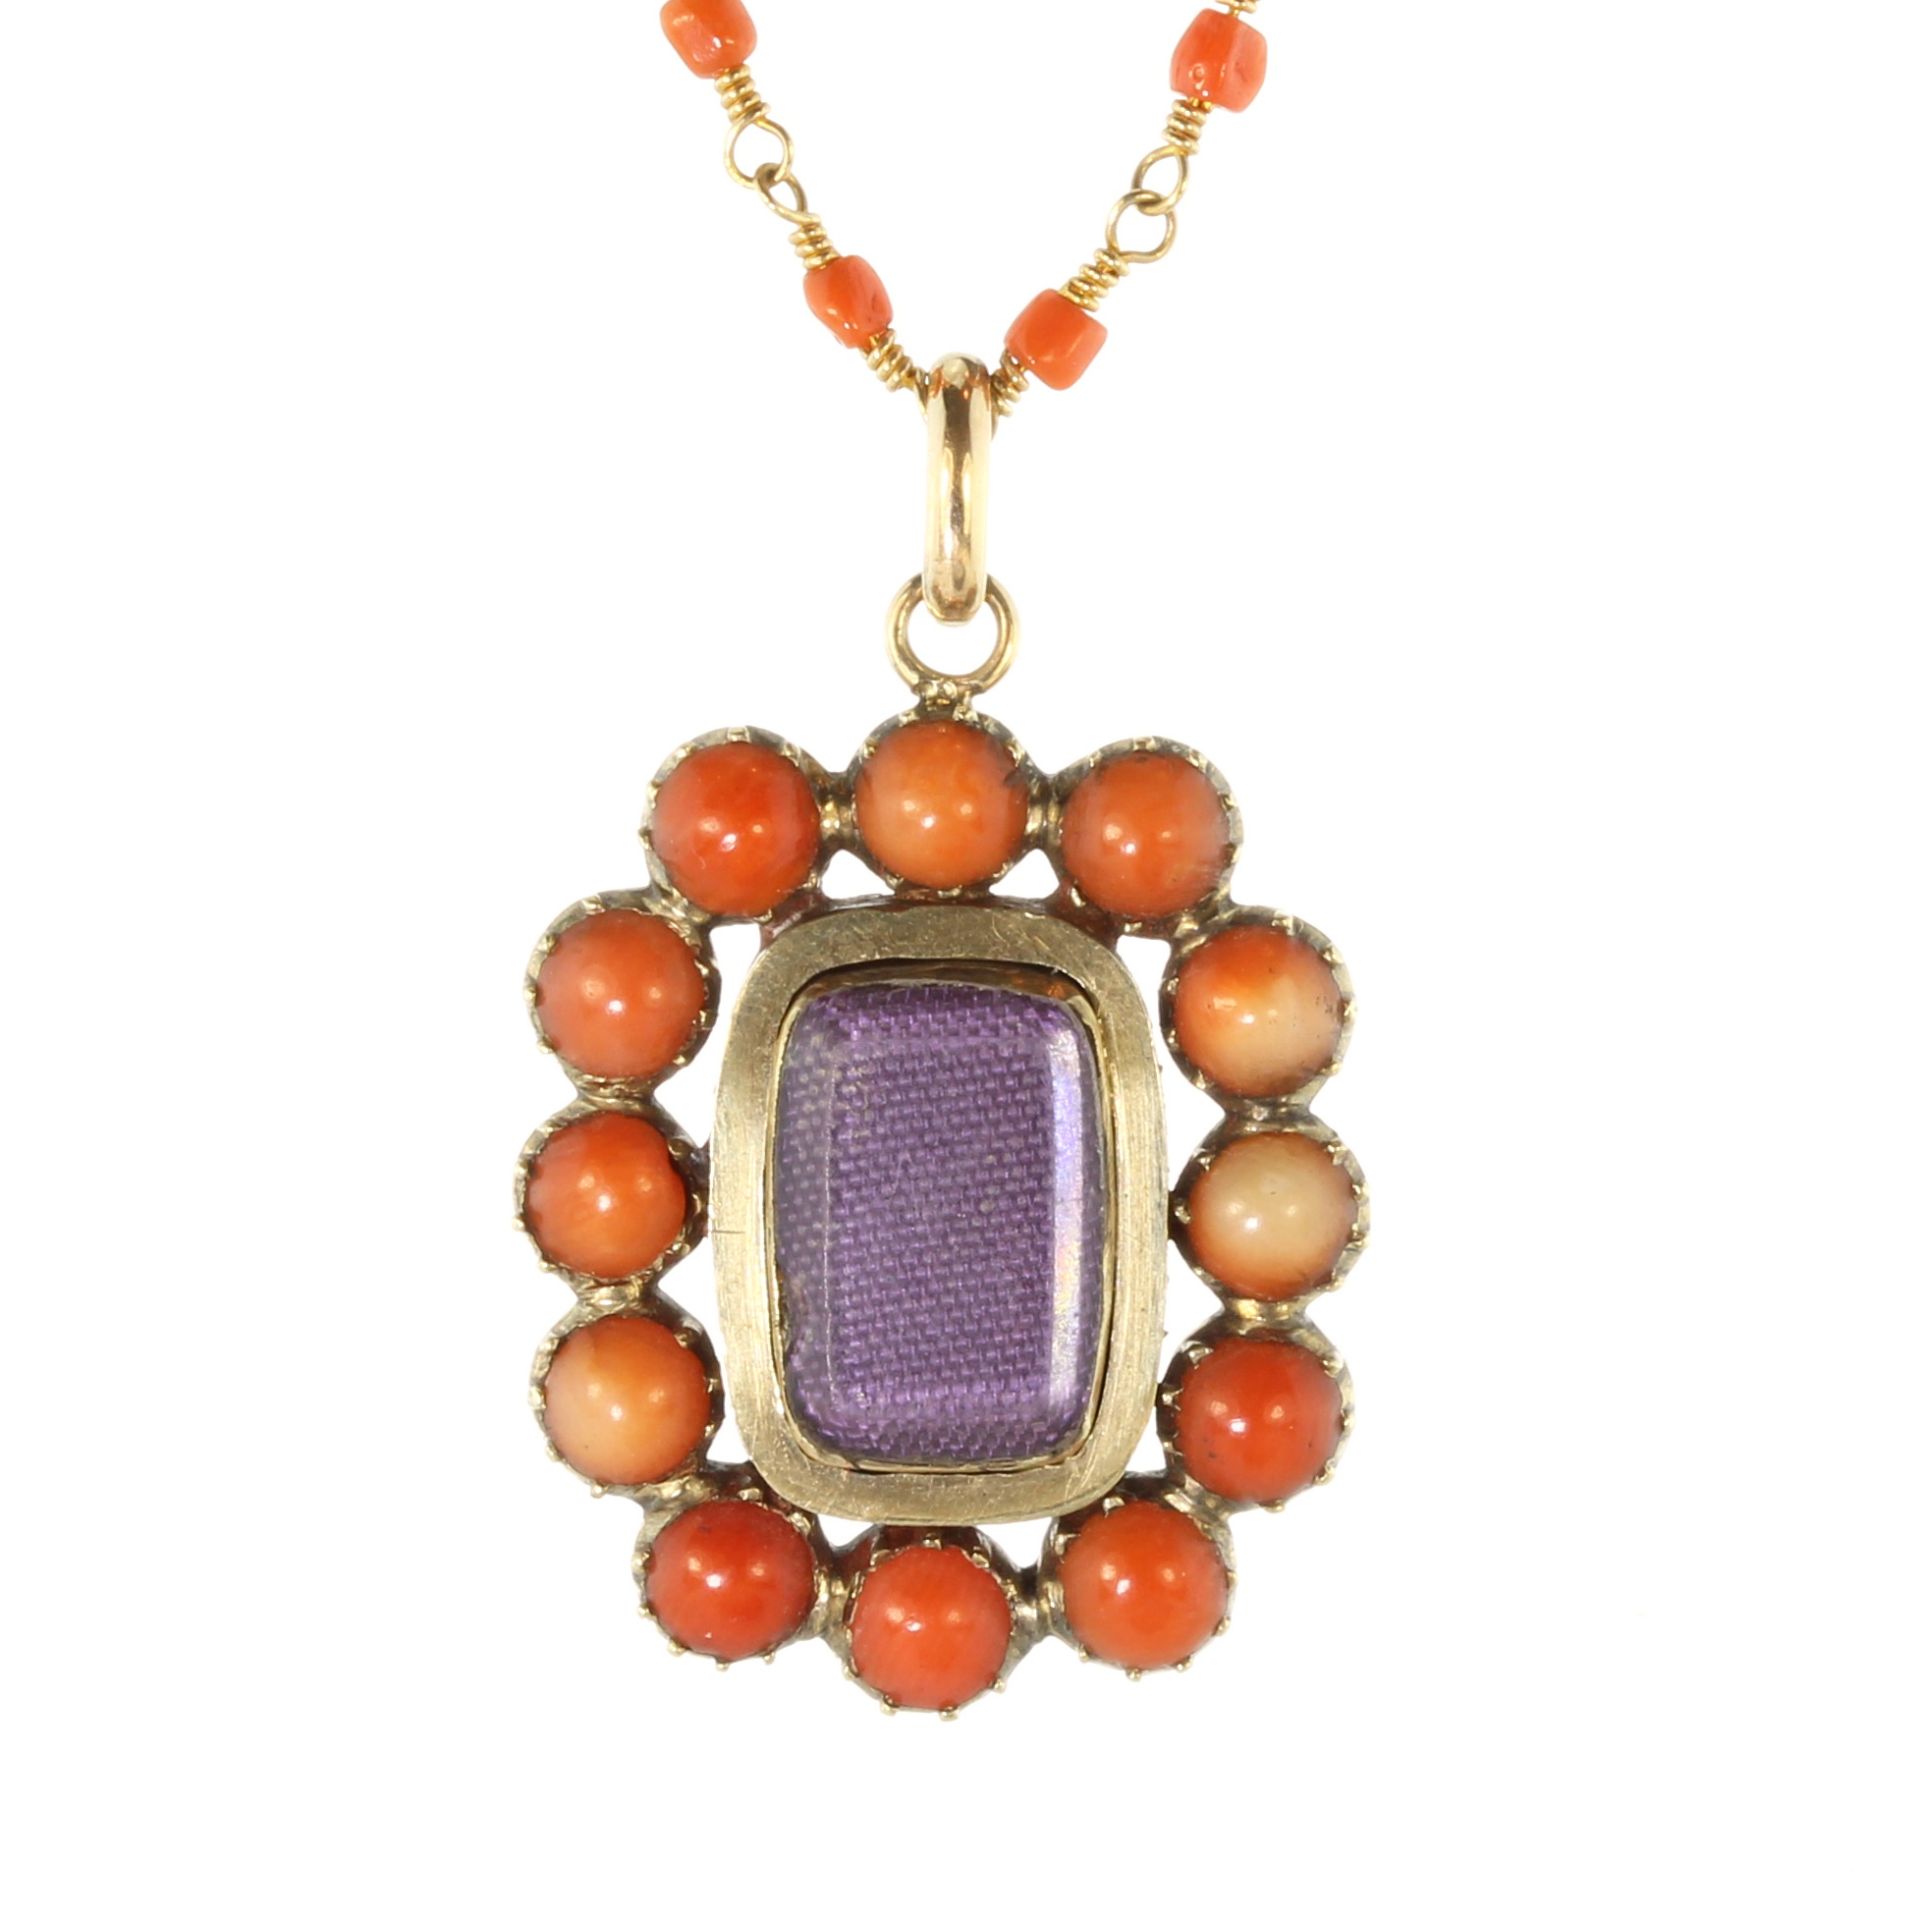 An antique Georgian coral bead mourning brooch and chain in high carat yellow gold, designed as a